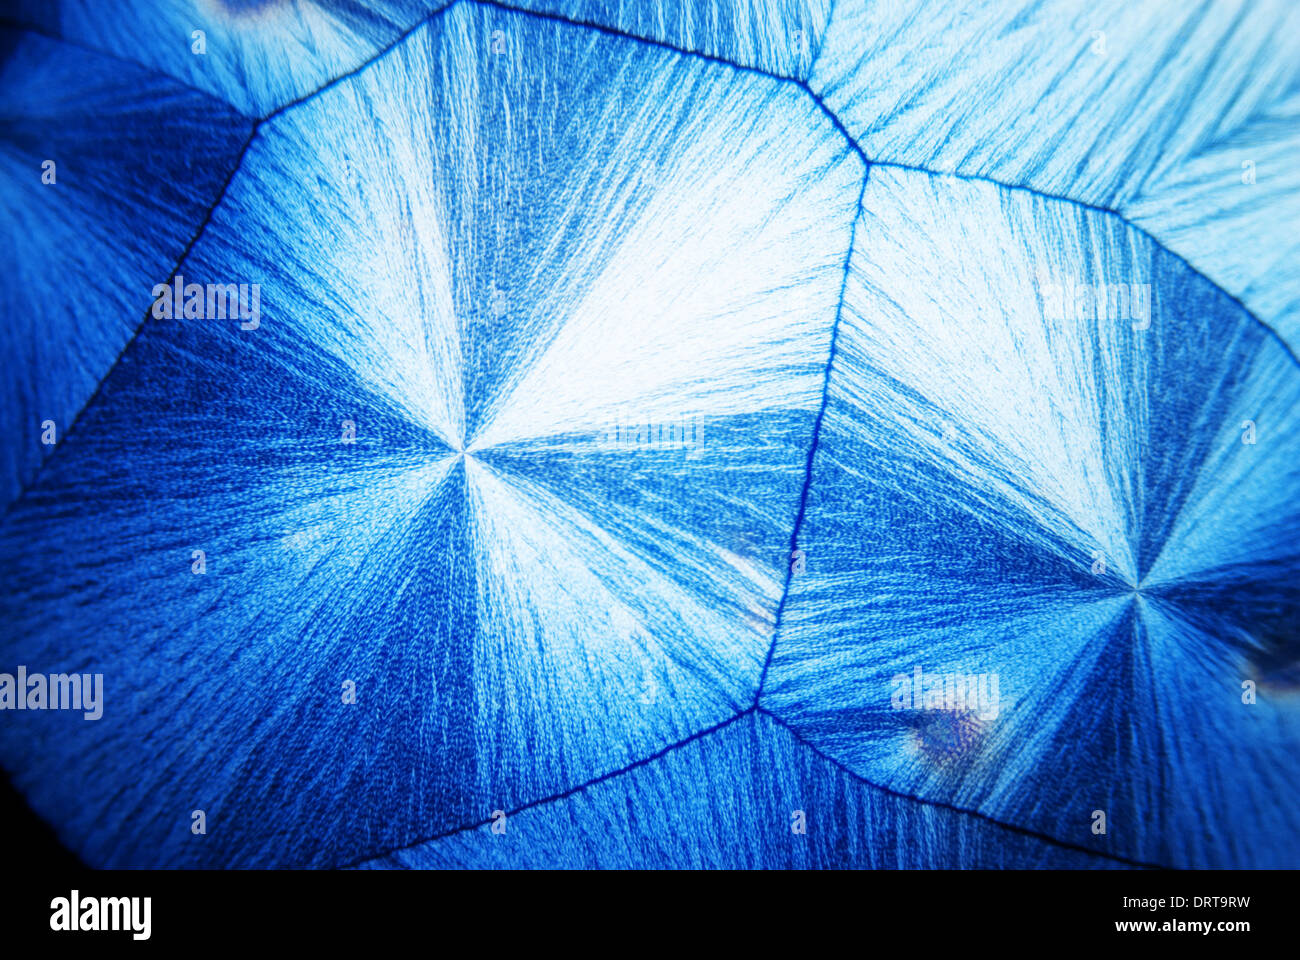 Microcrystals in polarized light Stock Photo